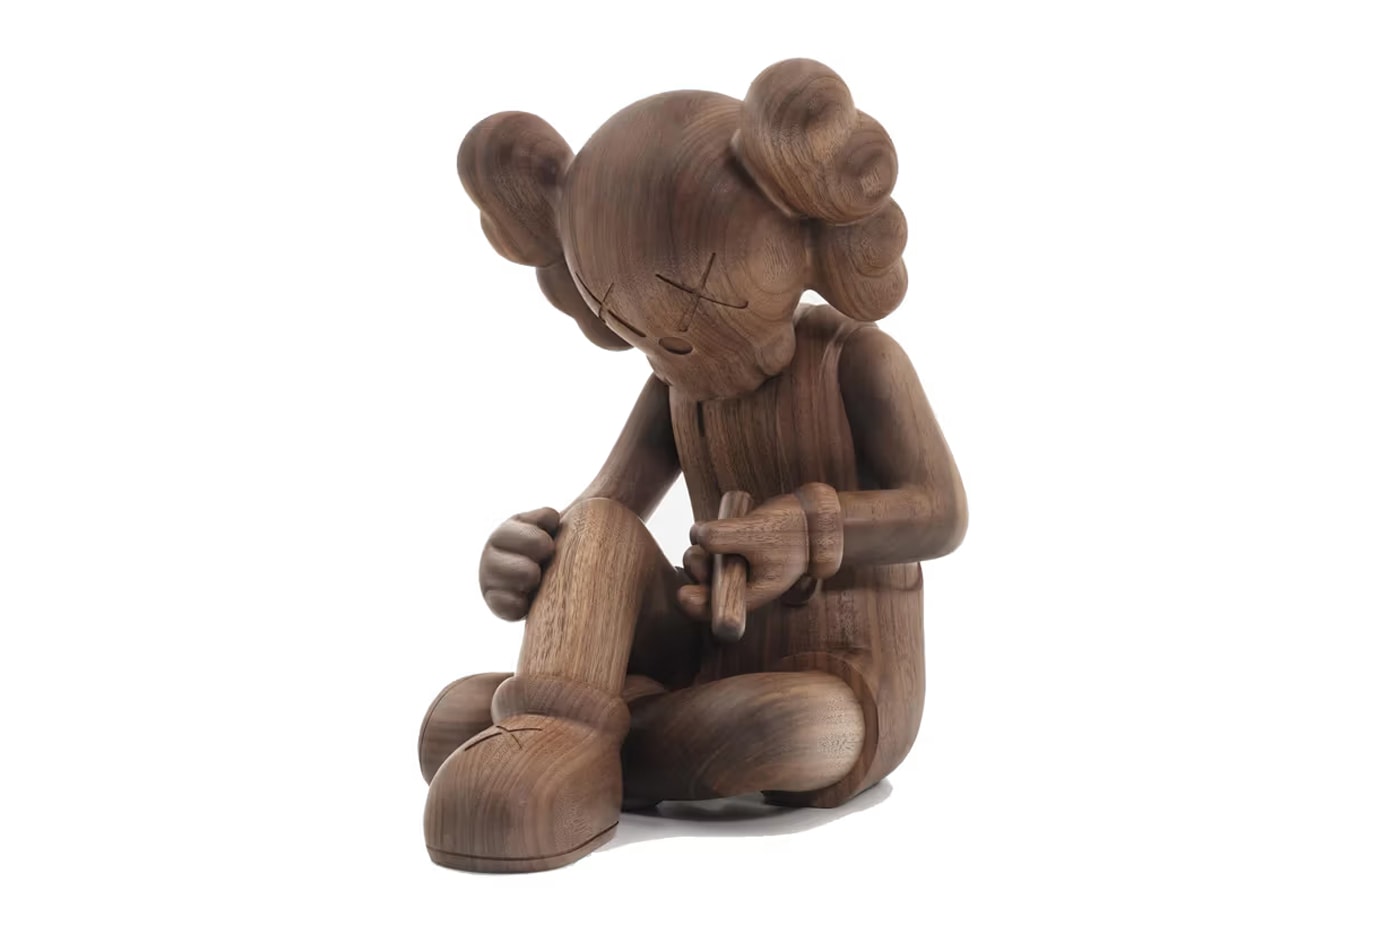 KAWS To Release 'BETTER KNOWING' Figure